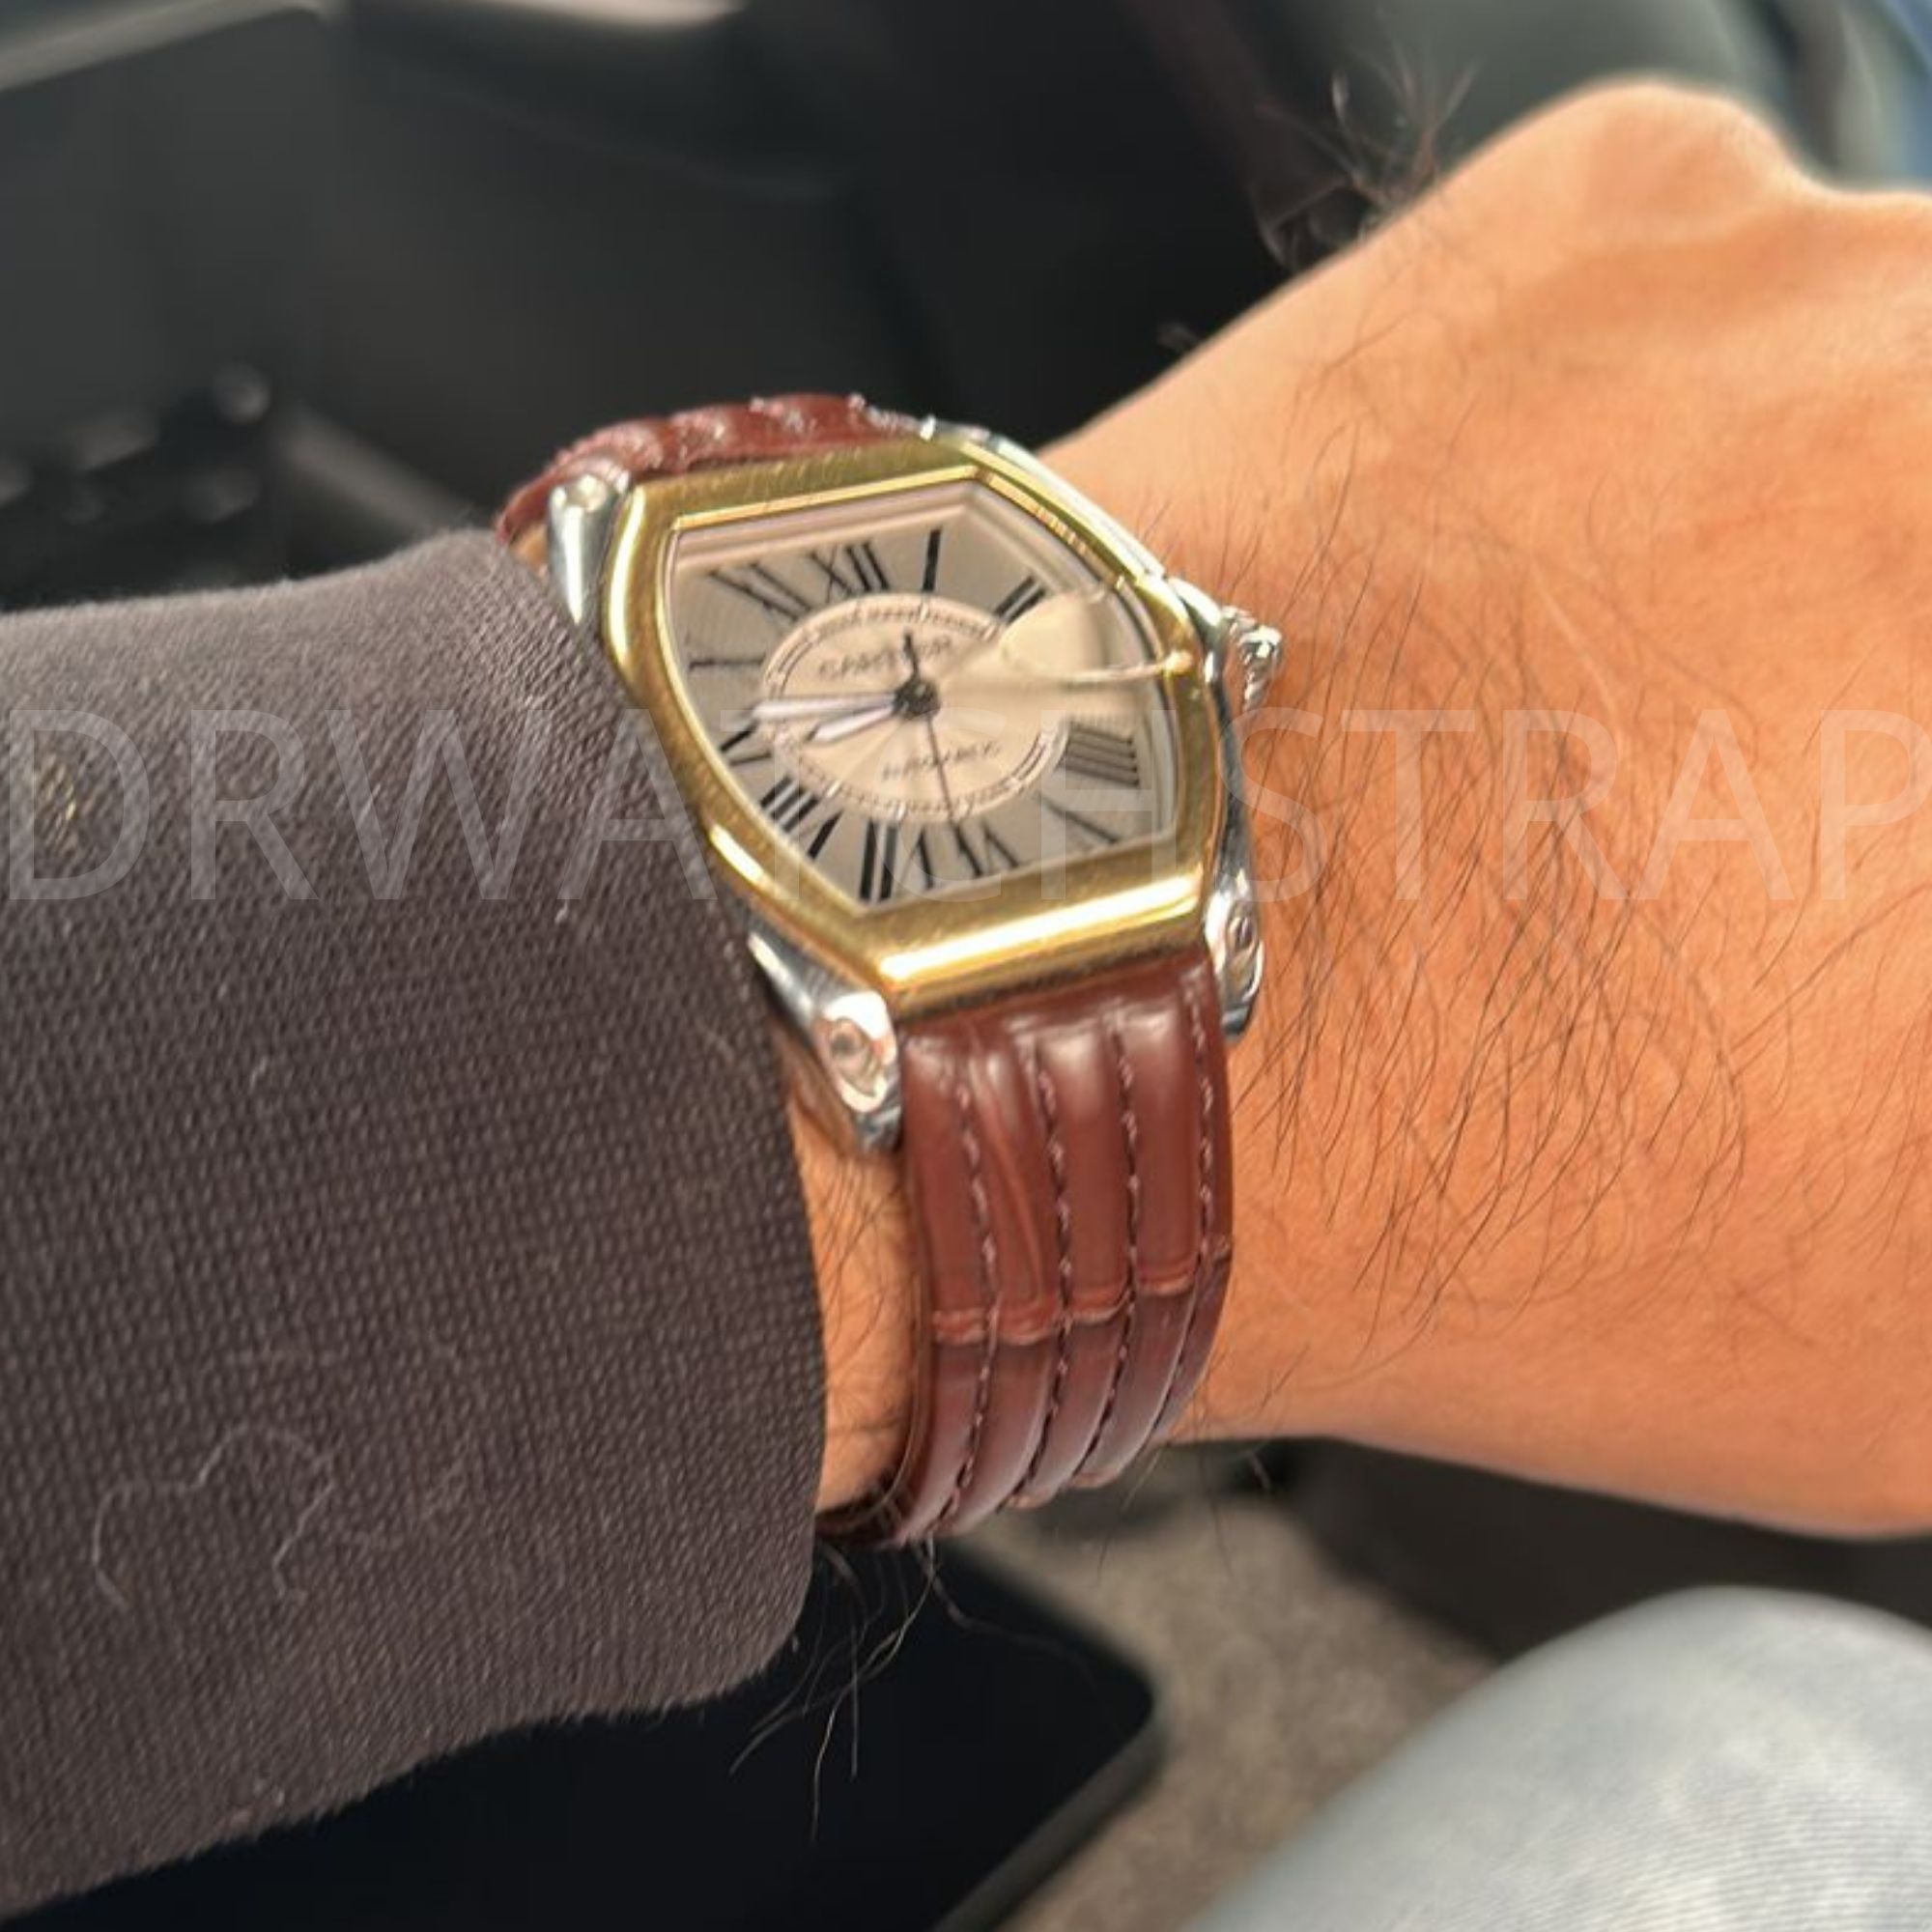 Cartier Roadster on wrist with custom brown alligator leather watch strap